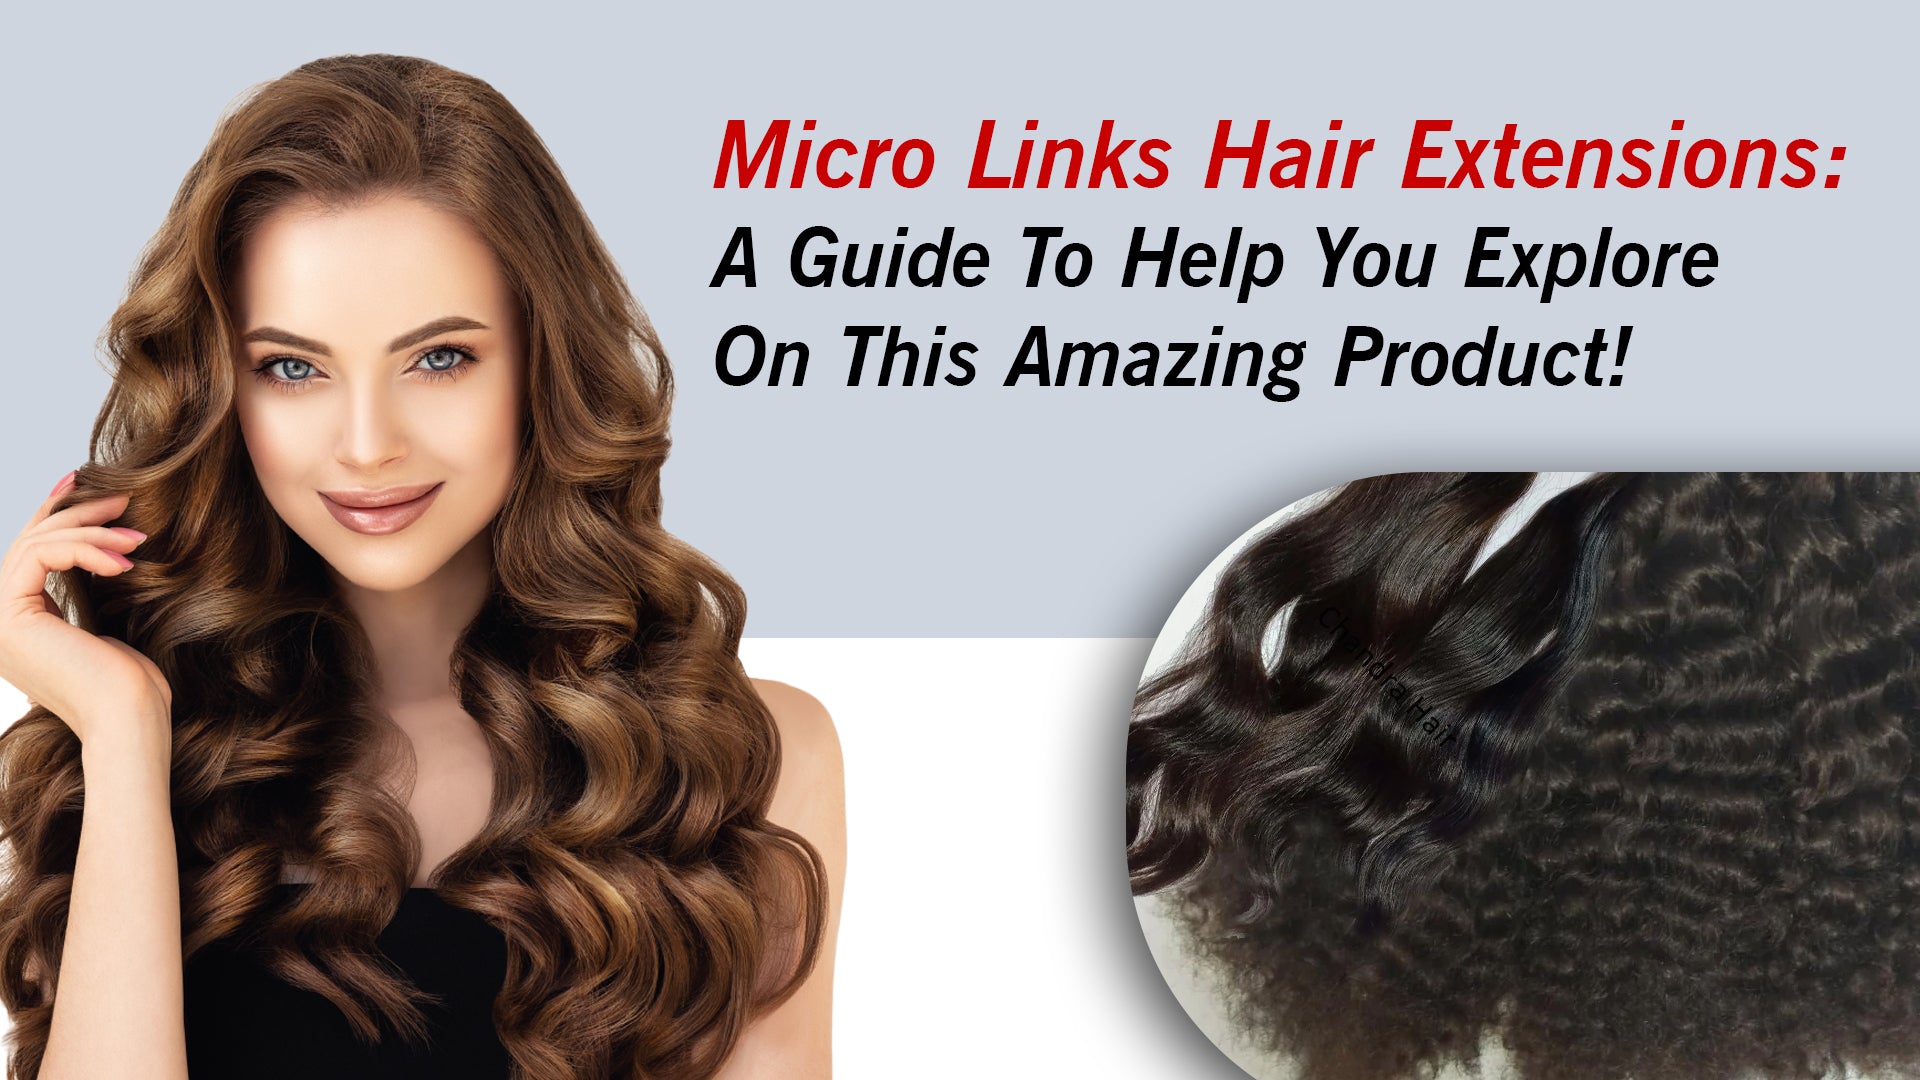 Micro Links Hair Extensions: A Guide To Help You Explore This Amazing Product